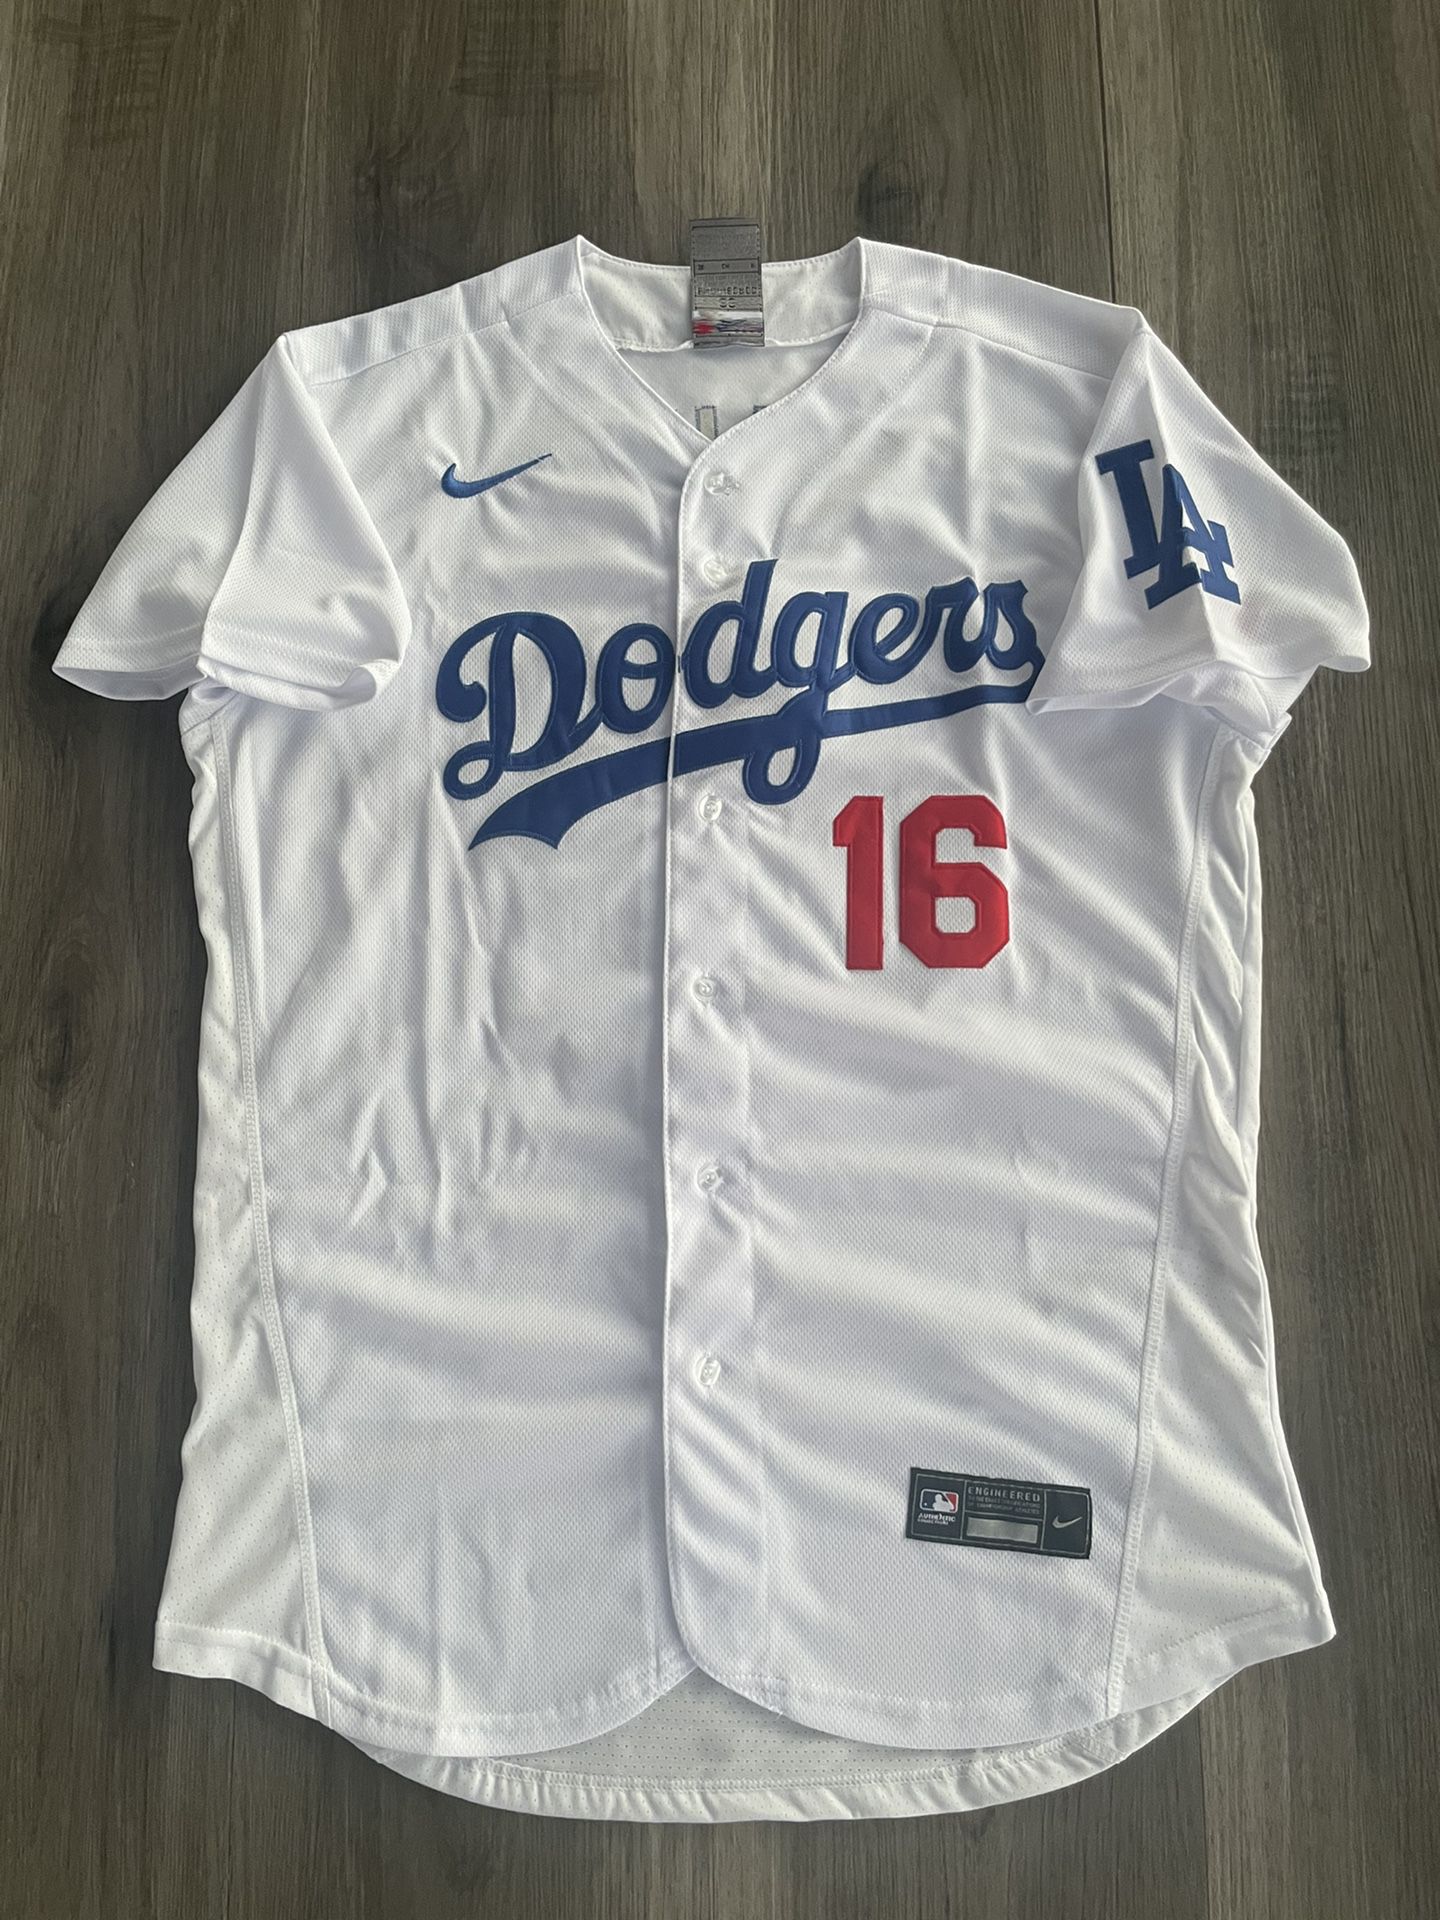 Will Smith Dodgers Jersey for Sale in Rancho Cucamonga, CA - OfferUp